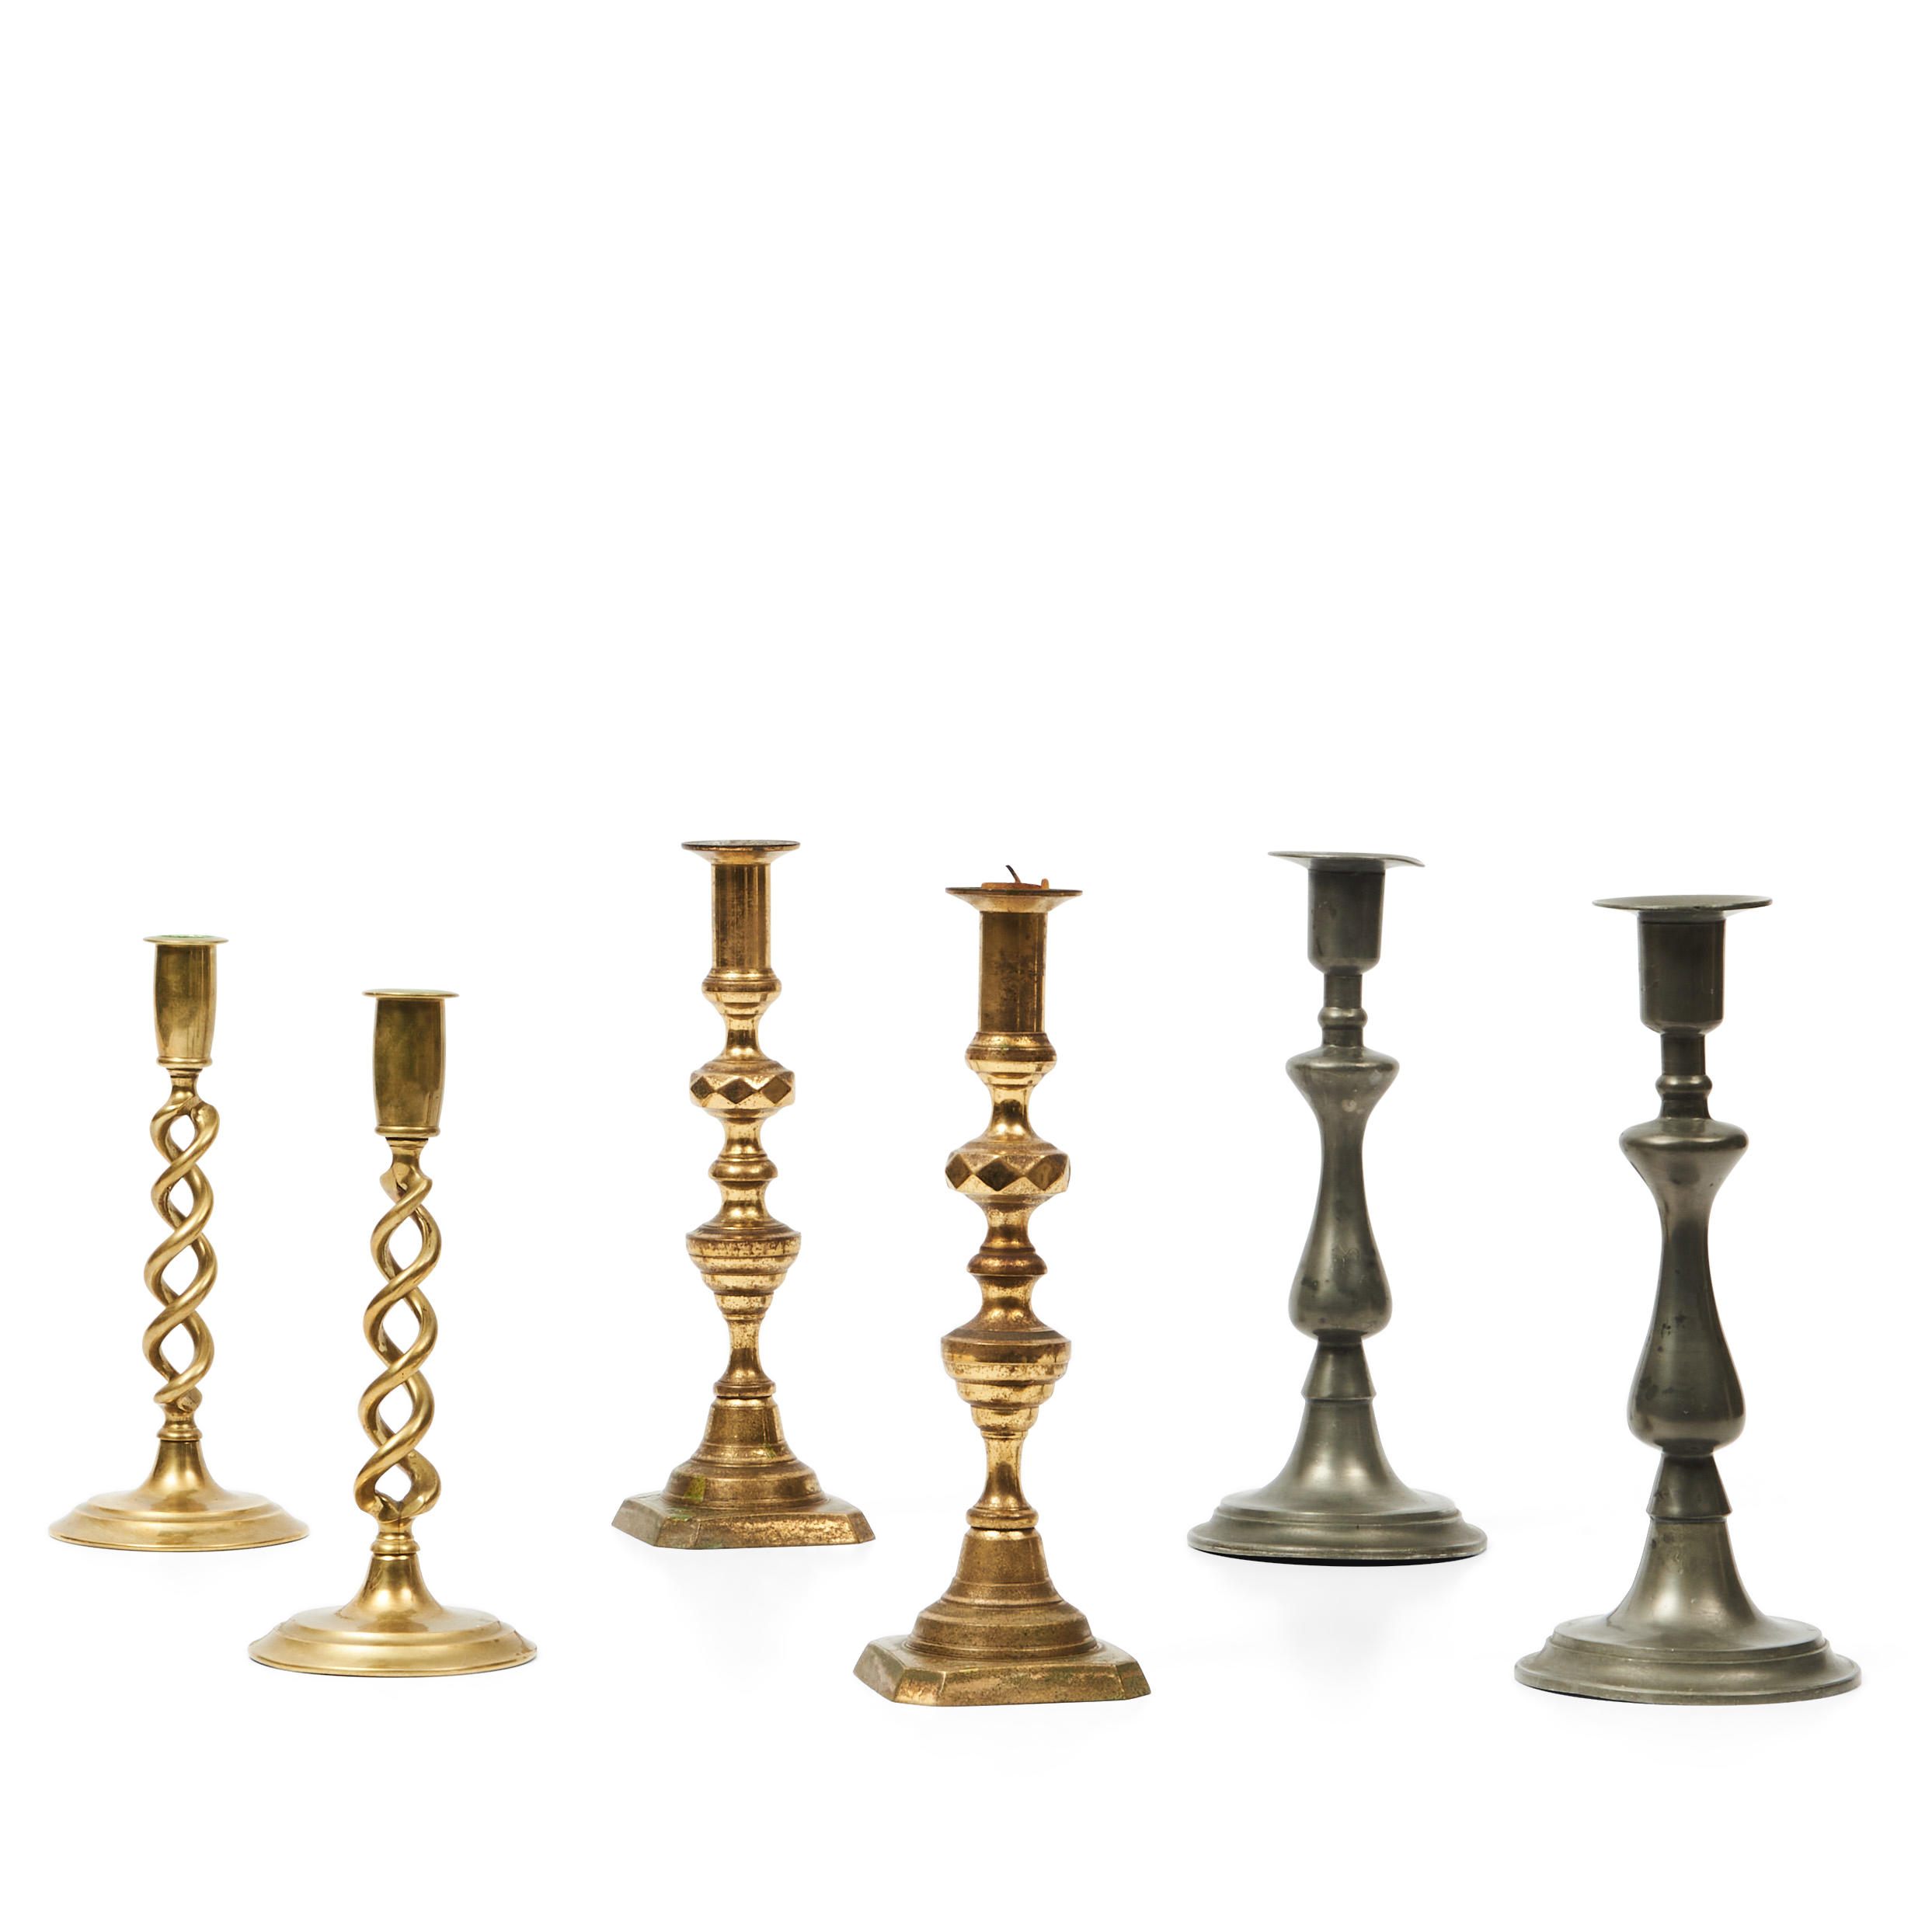 SIX BRASS AND PEWTER CANDLESTICKS 19th/20th